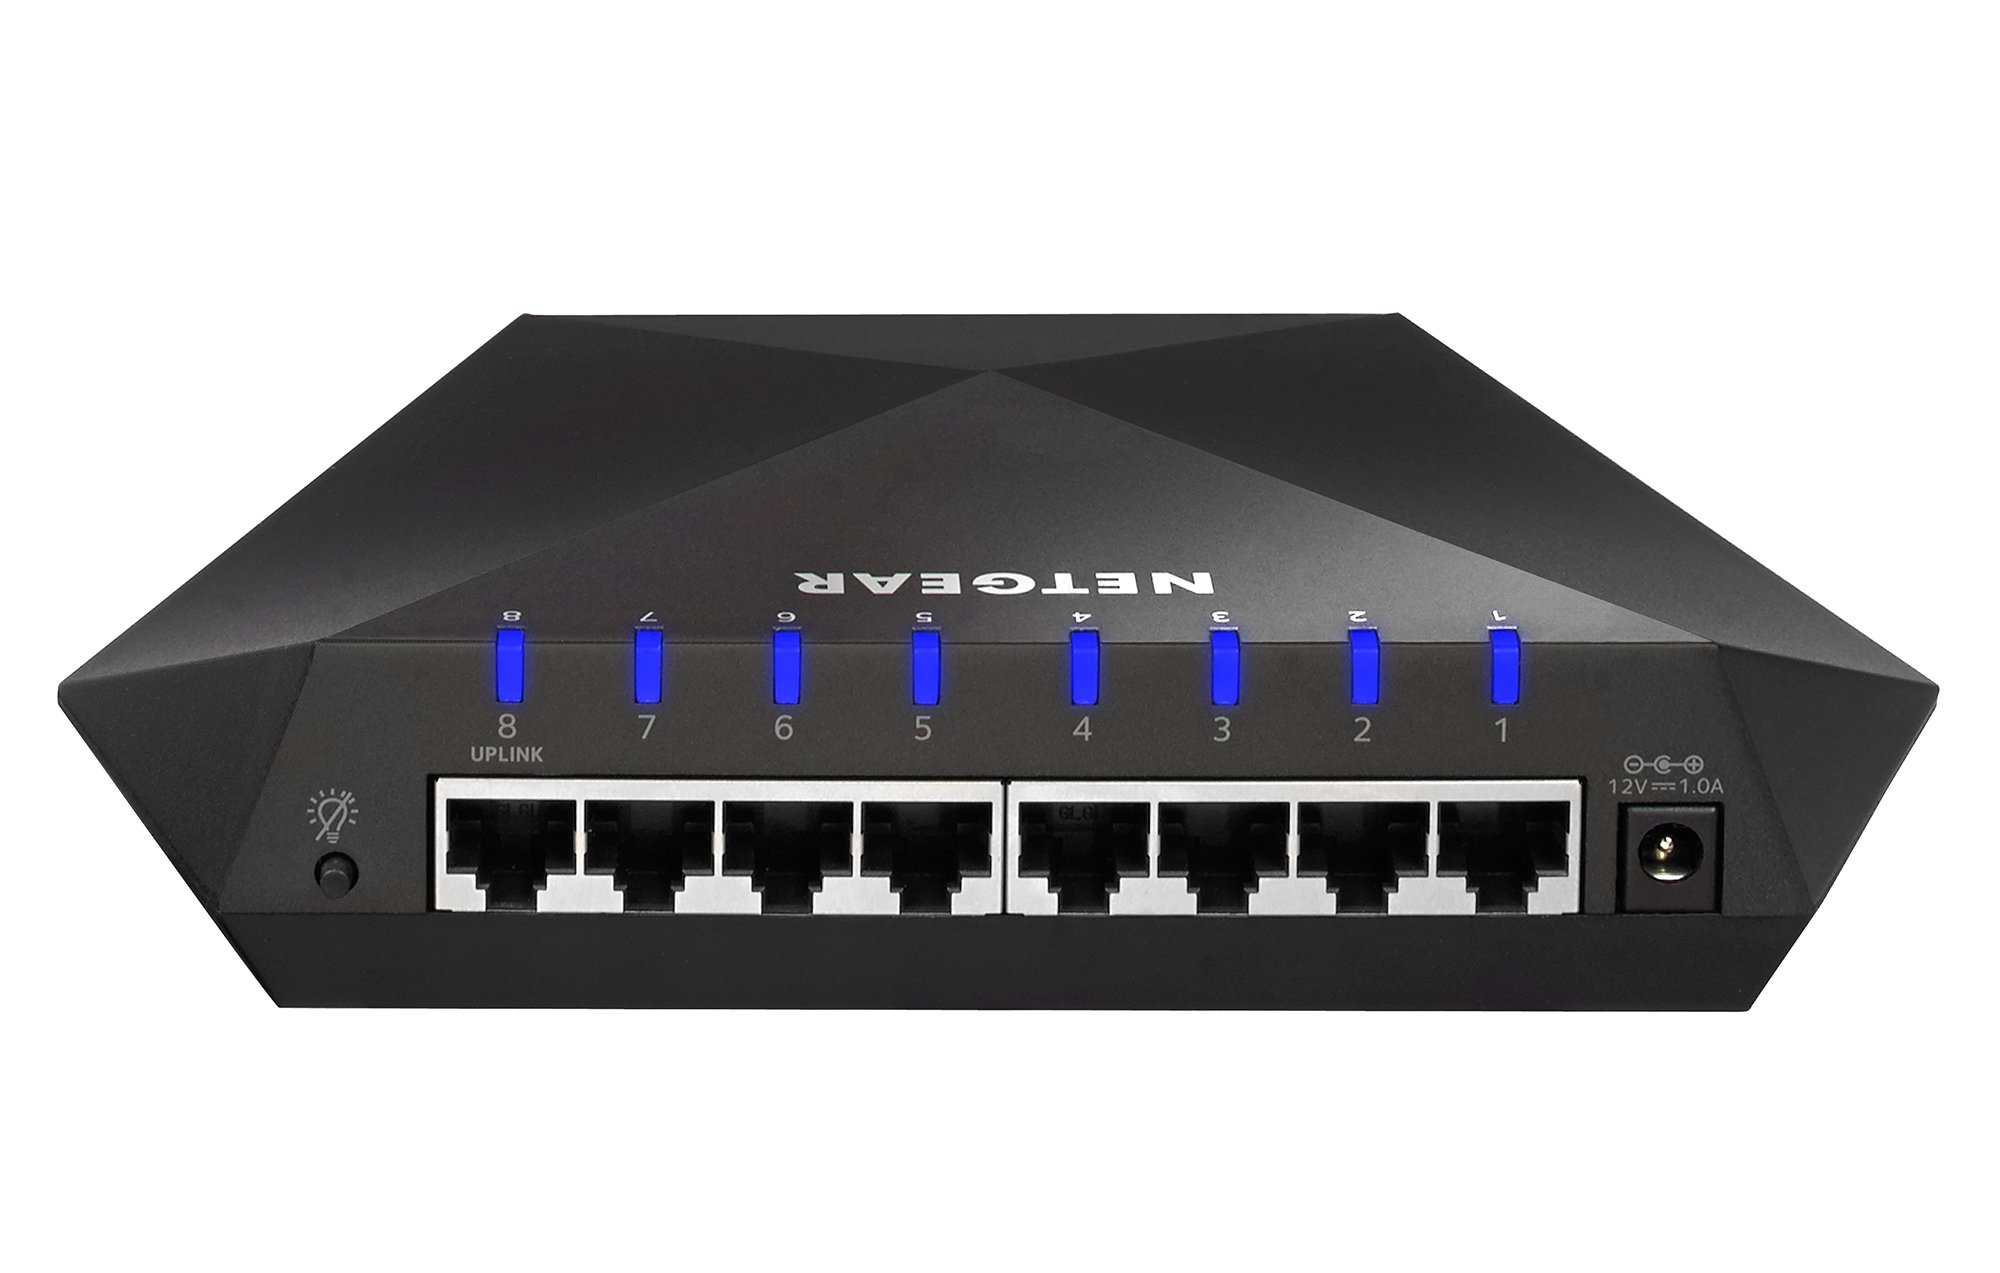 S8000 back REVIEW: Premium Nighthawk S8000 Ethernet Switch Delivers More Than Fast Gaming